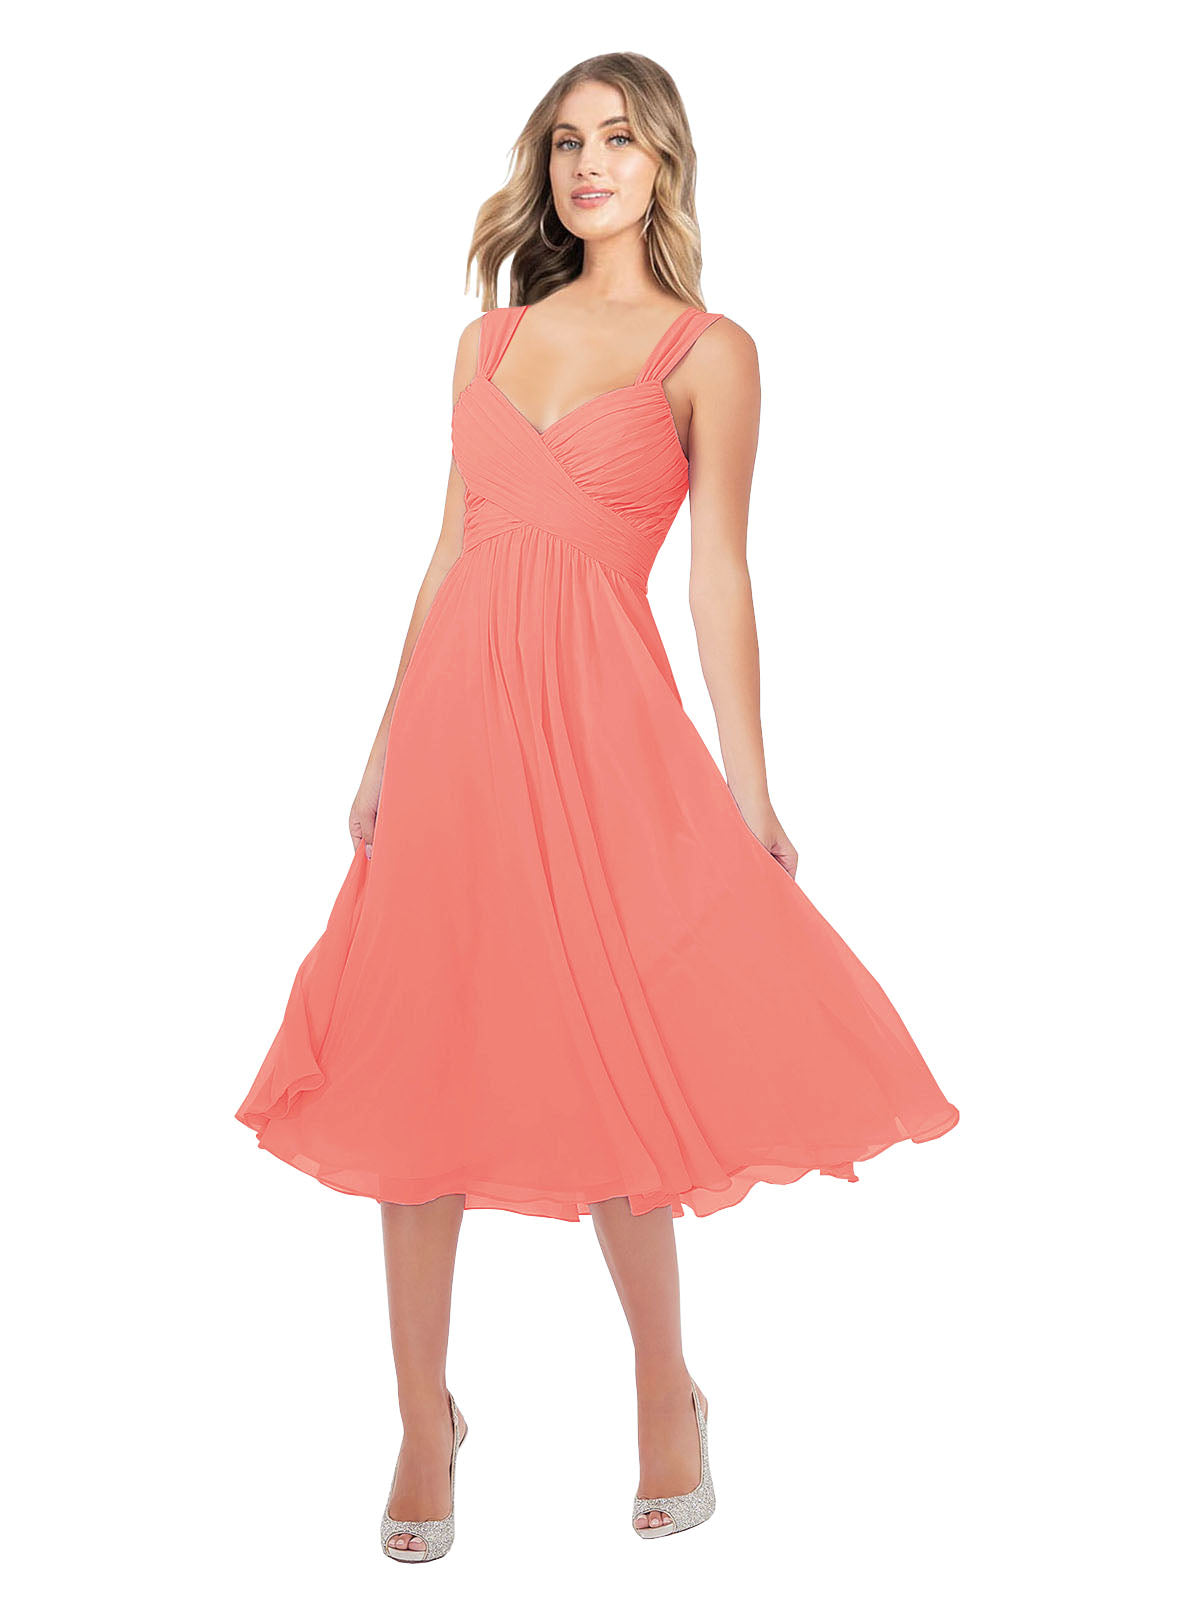 RightBrides Rodney Coral A-Line Sweetheart Sleeveless Short Bridesmaid Dress